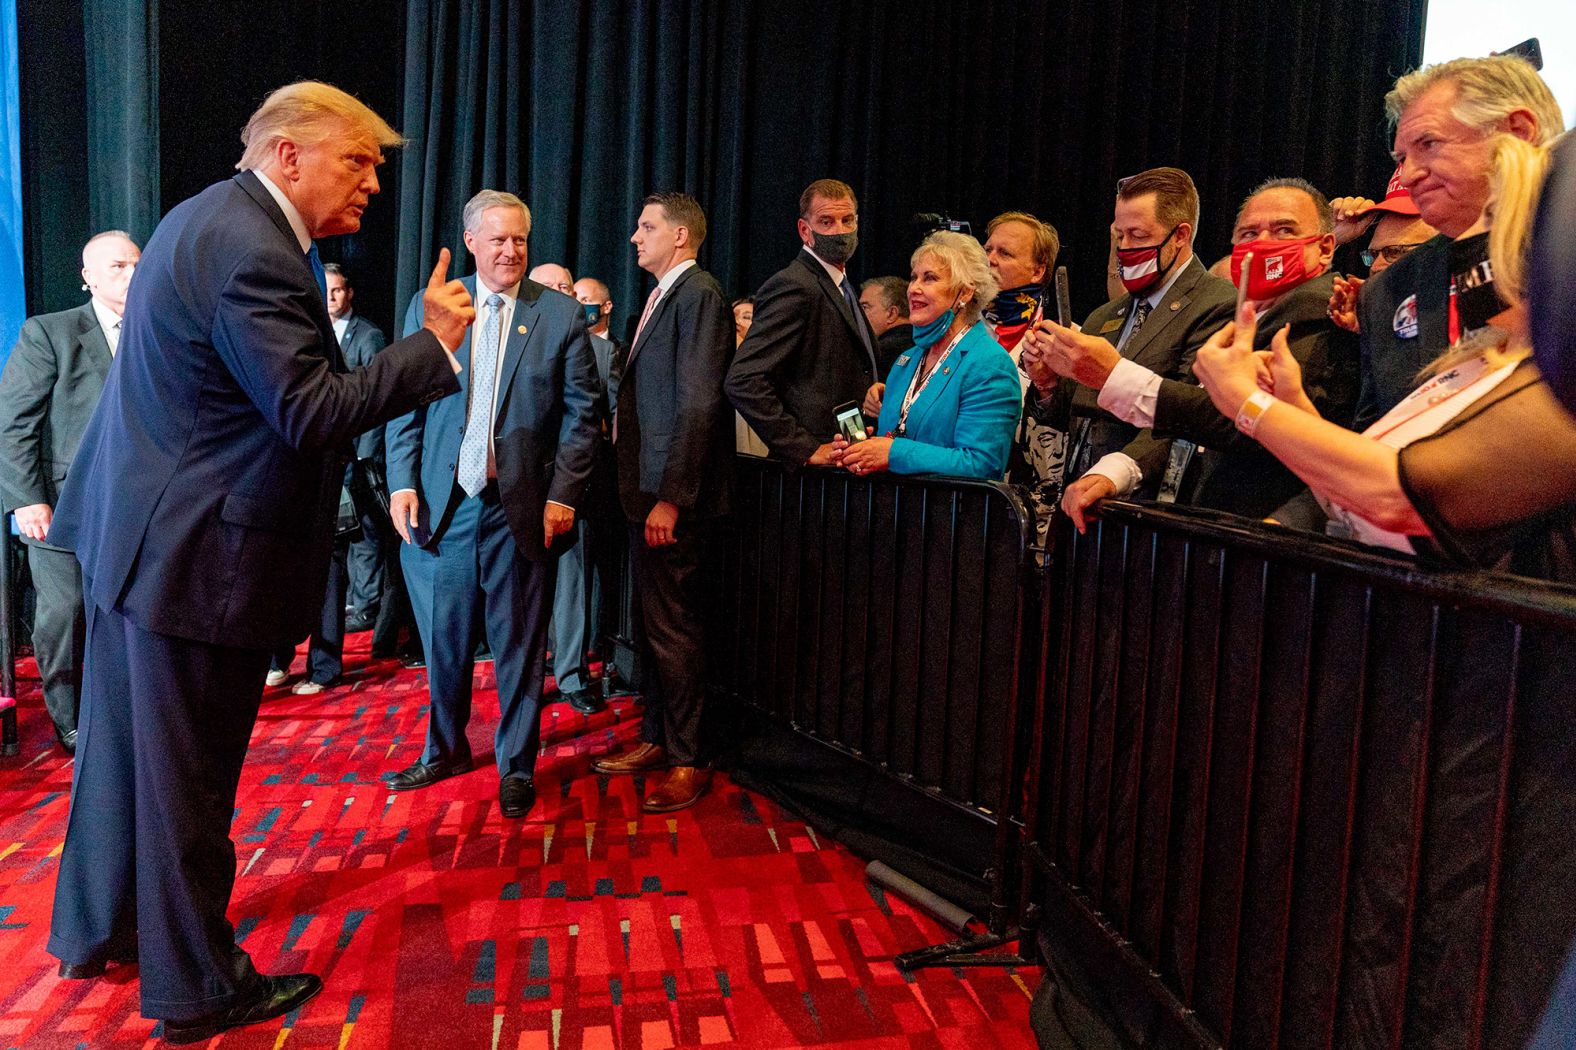 Trump poses for a photo after speaking in Charlotte early on Monday. Trump launched his convention week with <a href="index.php?page=&url=https%3A%2F%2Fwww.cnn.com%2F2020%2F08%2F24%2Fpolitics%2Ftrump-nomination-rnc%2Findex.html" target="_blank">a bitter tirade,</a> complaining that Democrats were exploiting the coronavirus pandemic to undermine his re-election. "What they're doing is using Covid to steal an election. They're using Covid to defraud the American people, all of our people, of a fair and free election," Trump said, without evidence, to applause from GOP delegates.